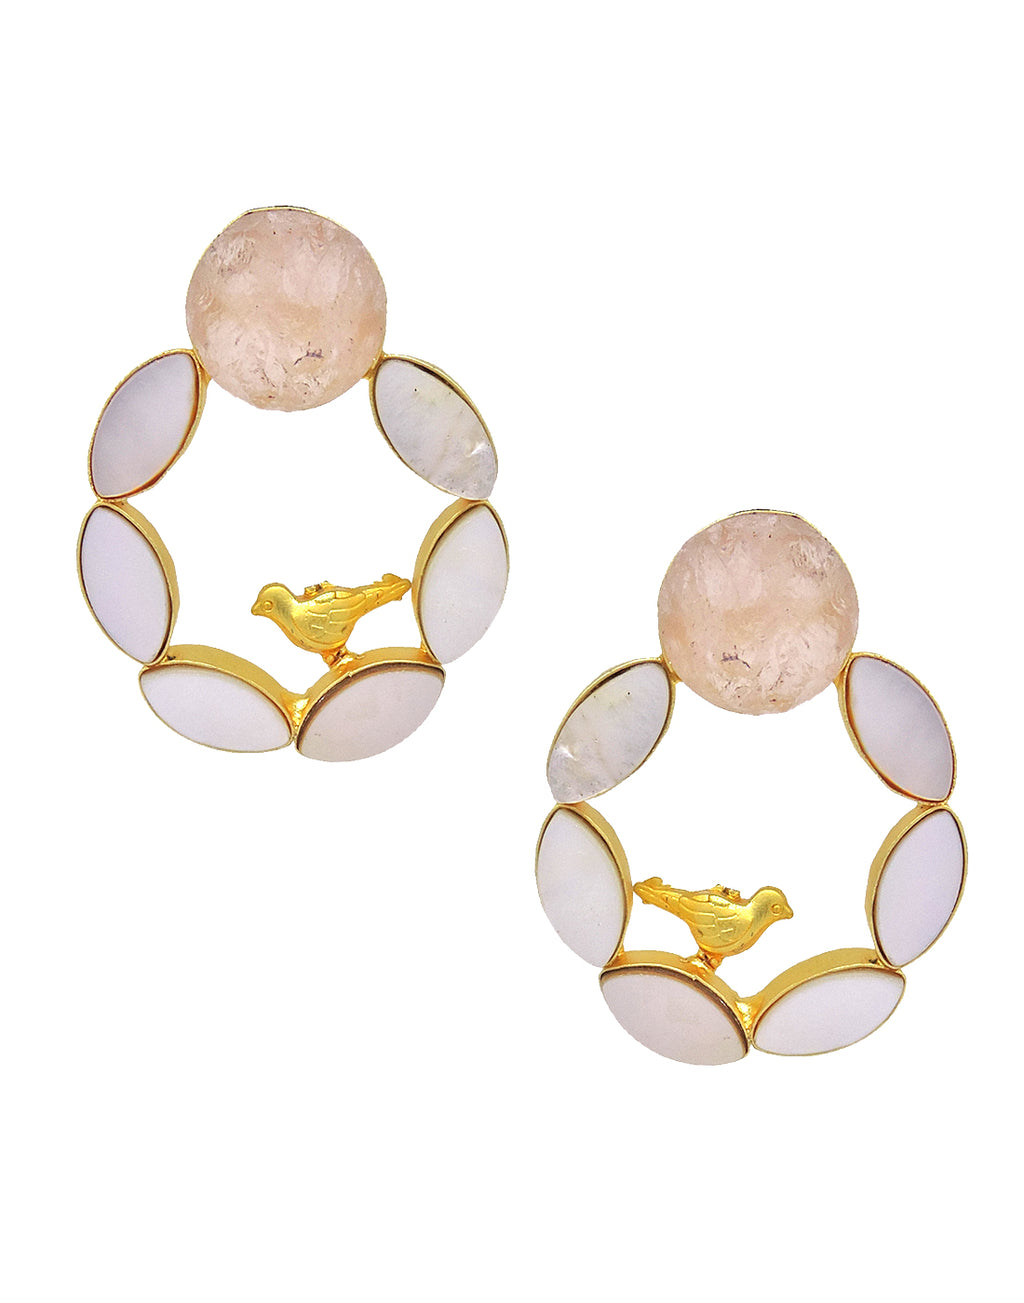 Pearl Cage Earrings (Rose Quartz) - Statement Earrings - Gold-Plated & Hypoallergenic - Made in India - Dubai Jewellery - Dori